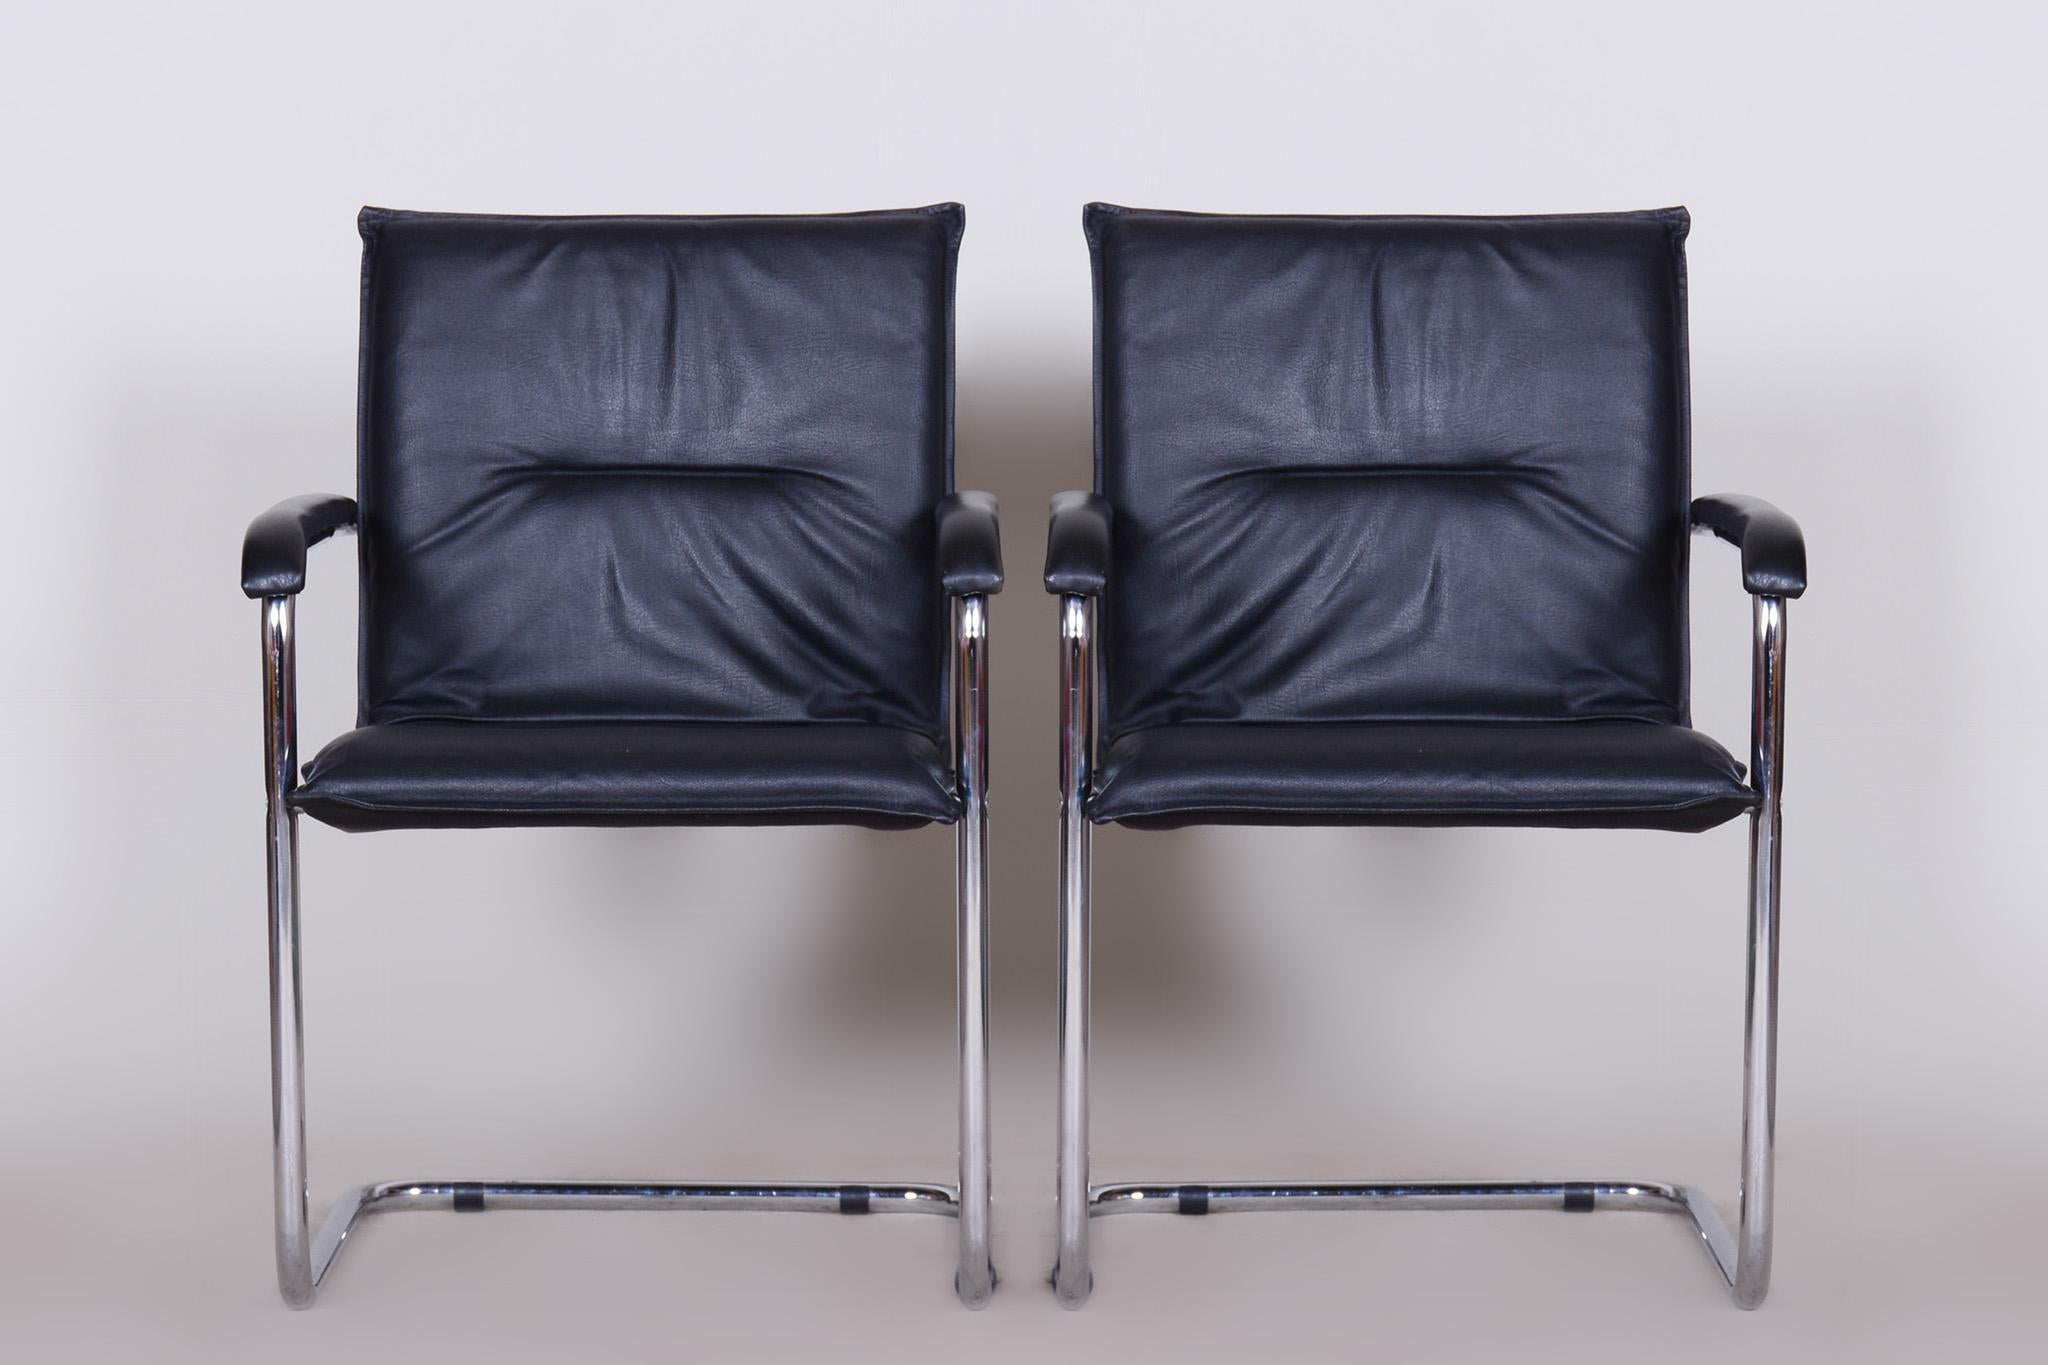 Pair of black bauhaus chairs, artificial leather.

Period: 1970-1979.
Source: Germany.
Material: artificial leather, chrome-plated steel.

Well-preserved original condition.
Chrome and leather are professionally cleaned.